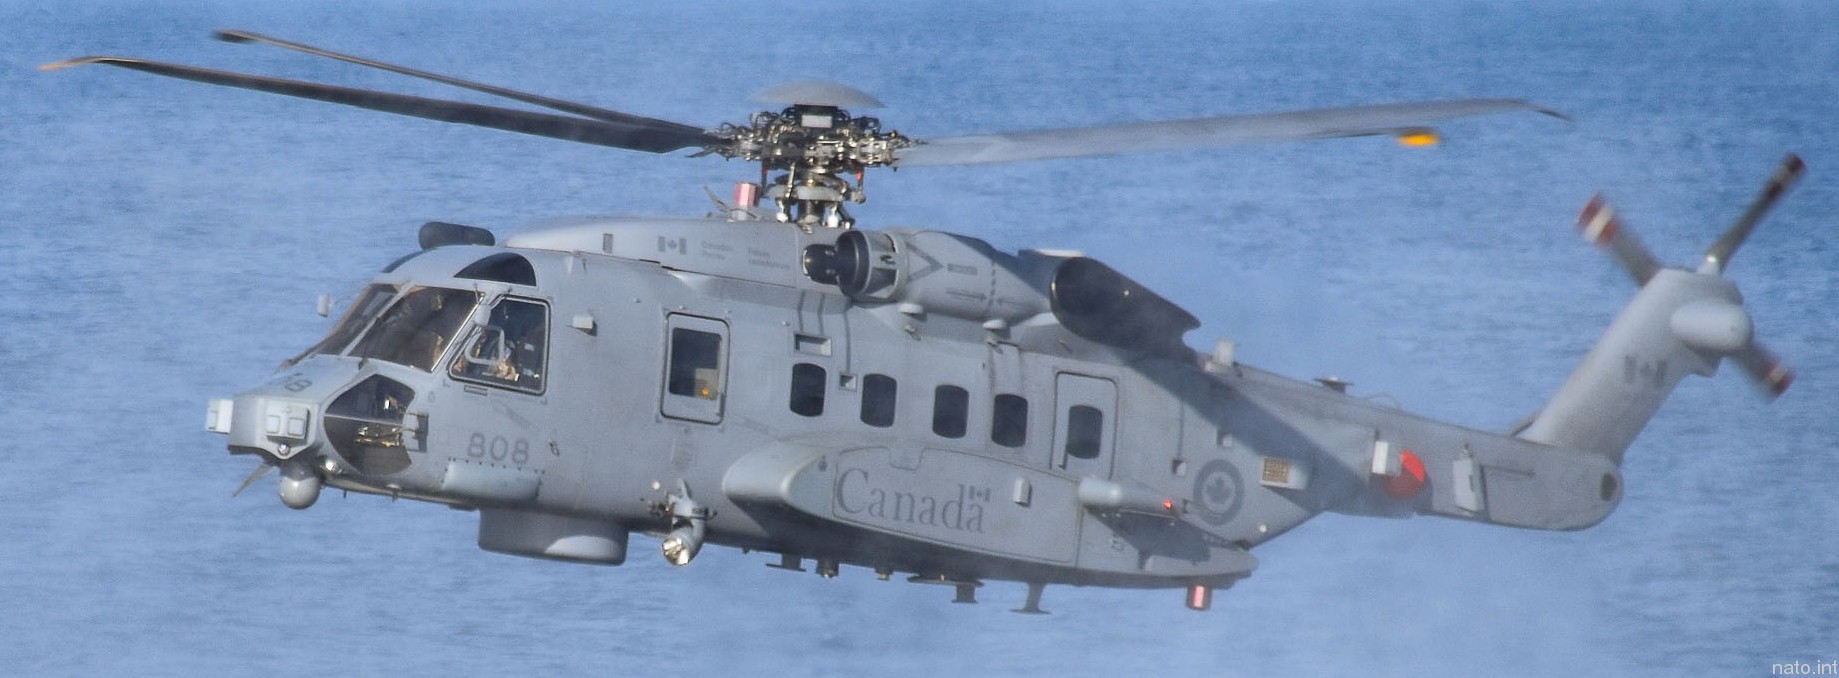 ch-148 cyclone naval helicopter royal canadian air force navy rcaf sikorsky hmcs 406 423 443 maritime squadron 08